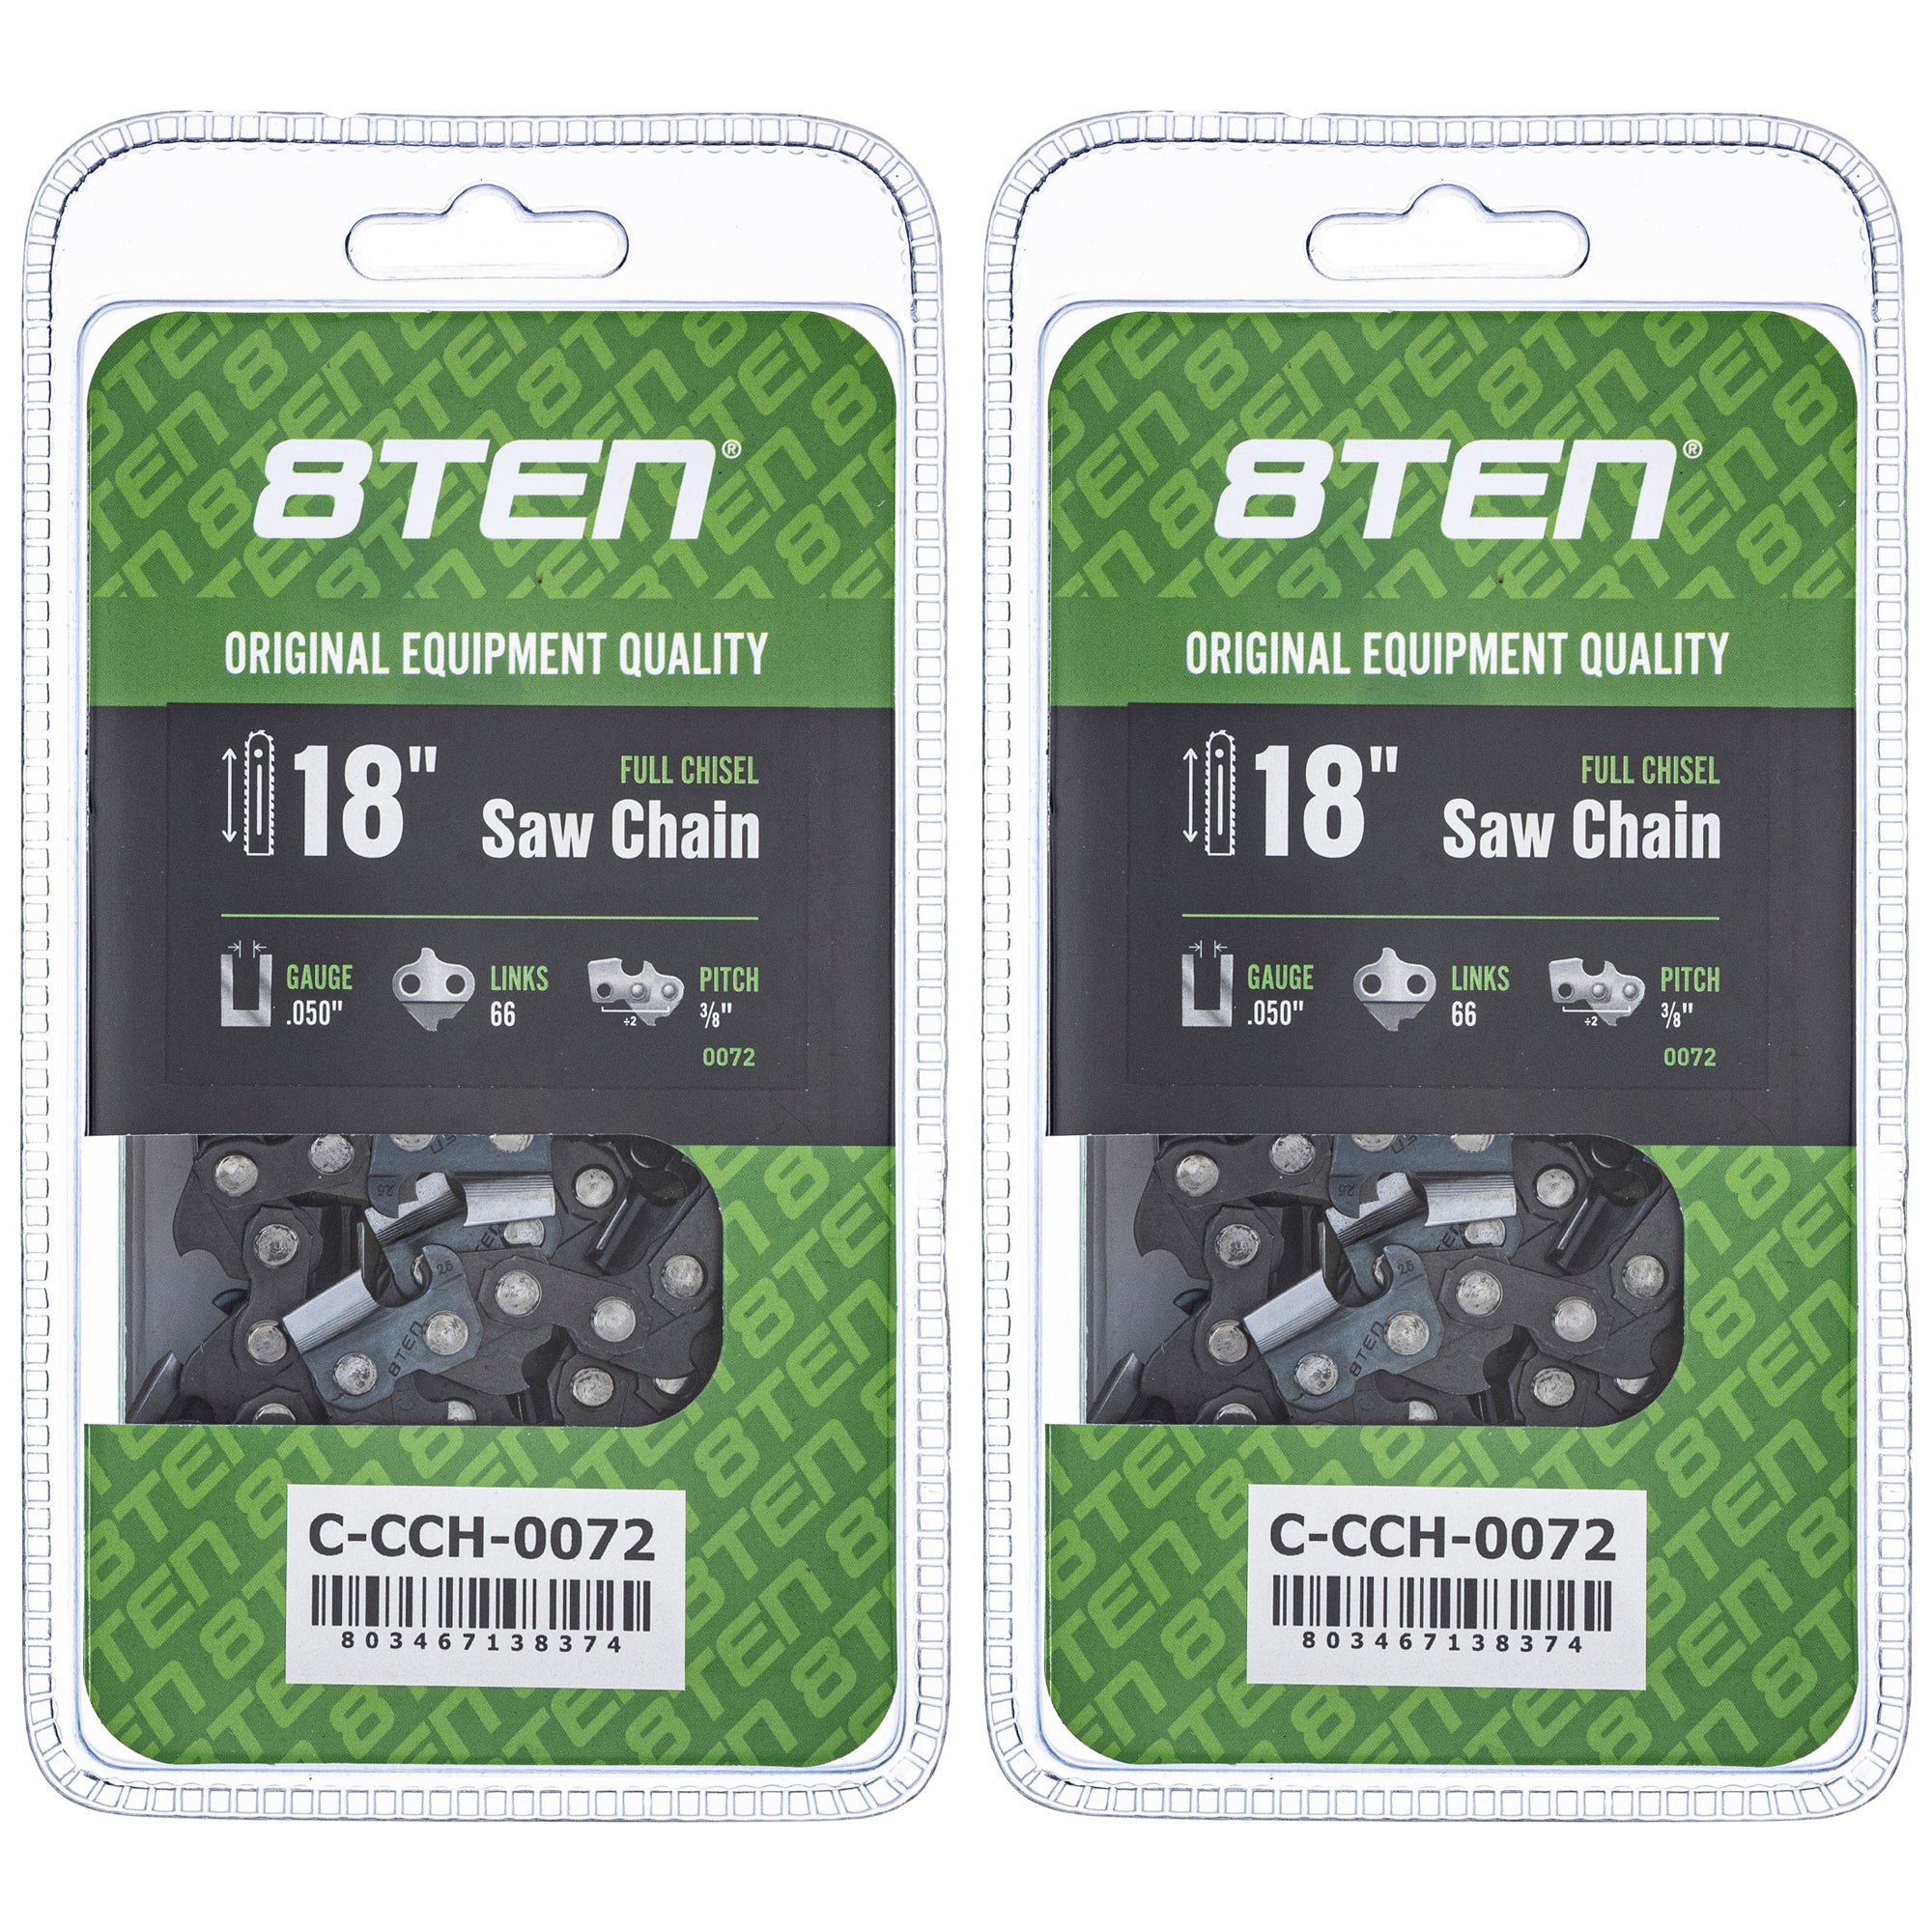 Chainsaw Chain 18 Inch .050 3/8 66DL 2-Pack for zOTHER Ref No Oregon Echo Shindaiwa Bear 8TEN 810-CCC2294H